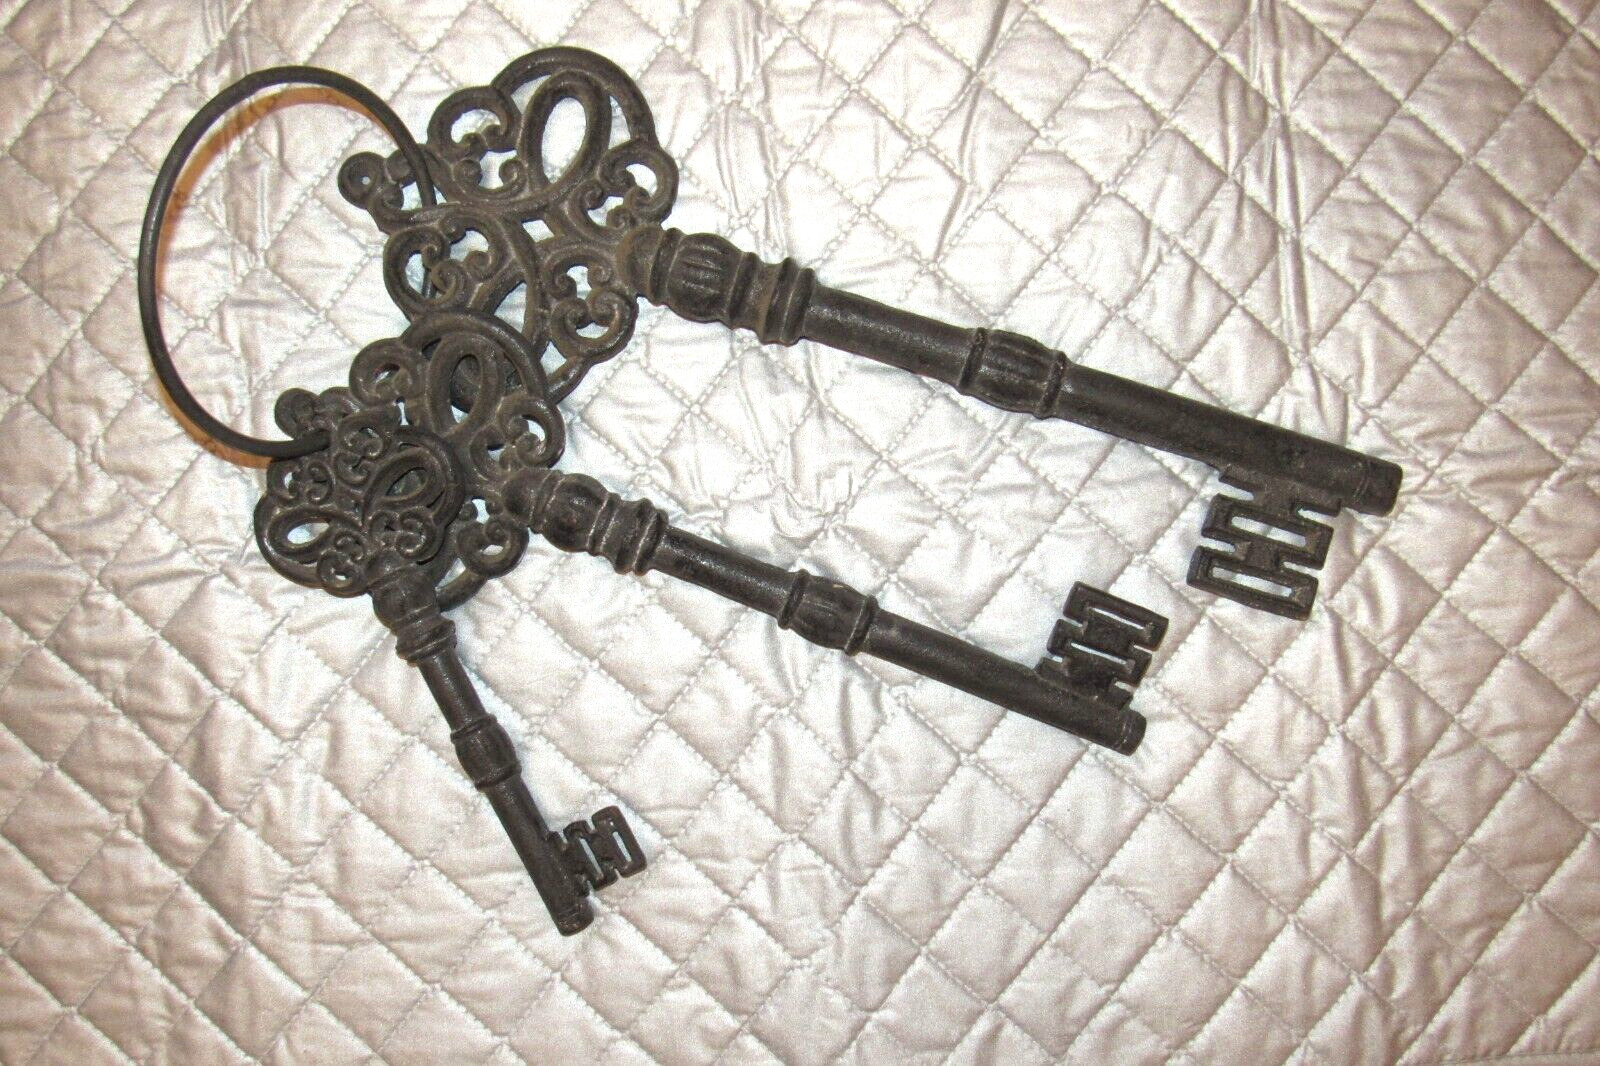 Huge Antique Iron Skeleton Keys 3 on Ring 17.5 inches largest key 7+ lbs